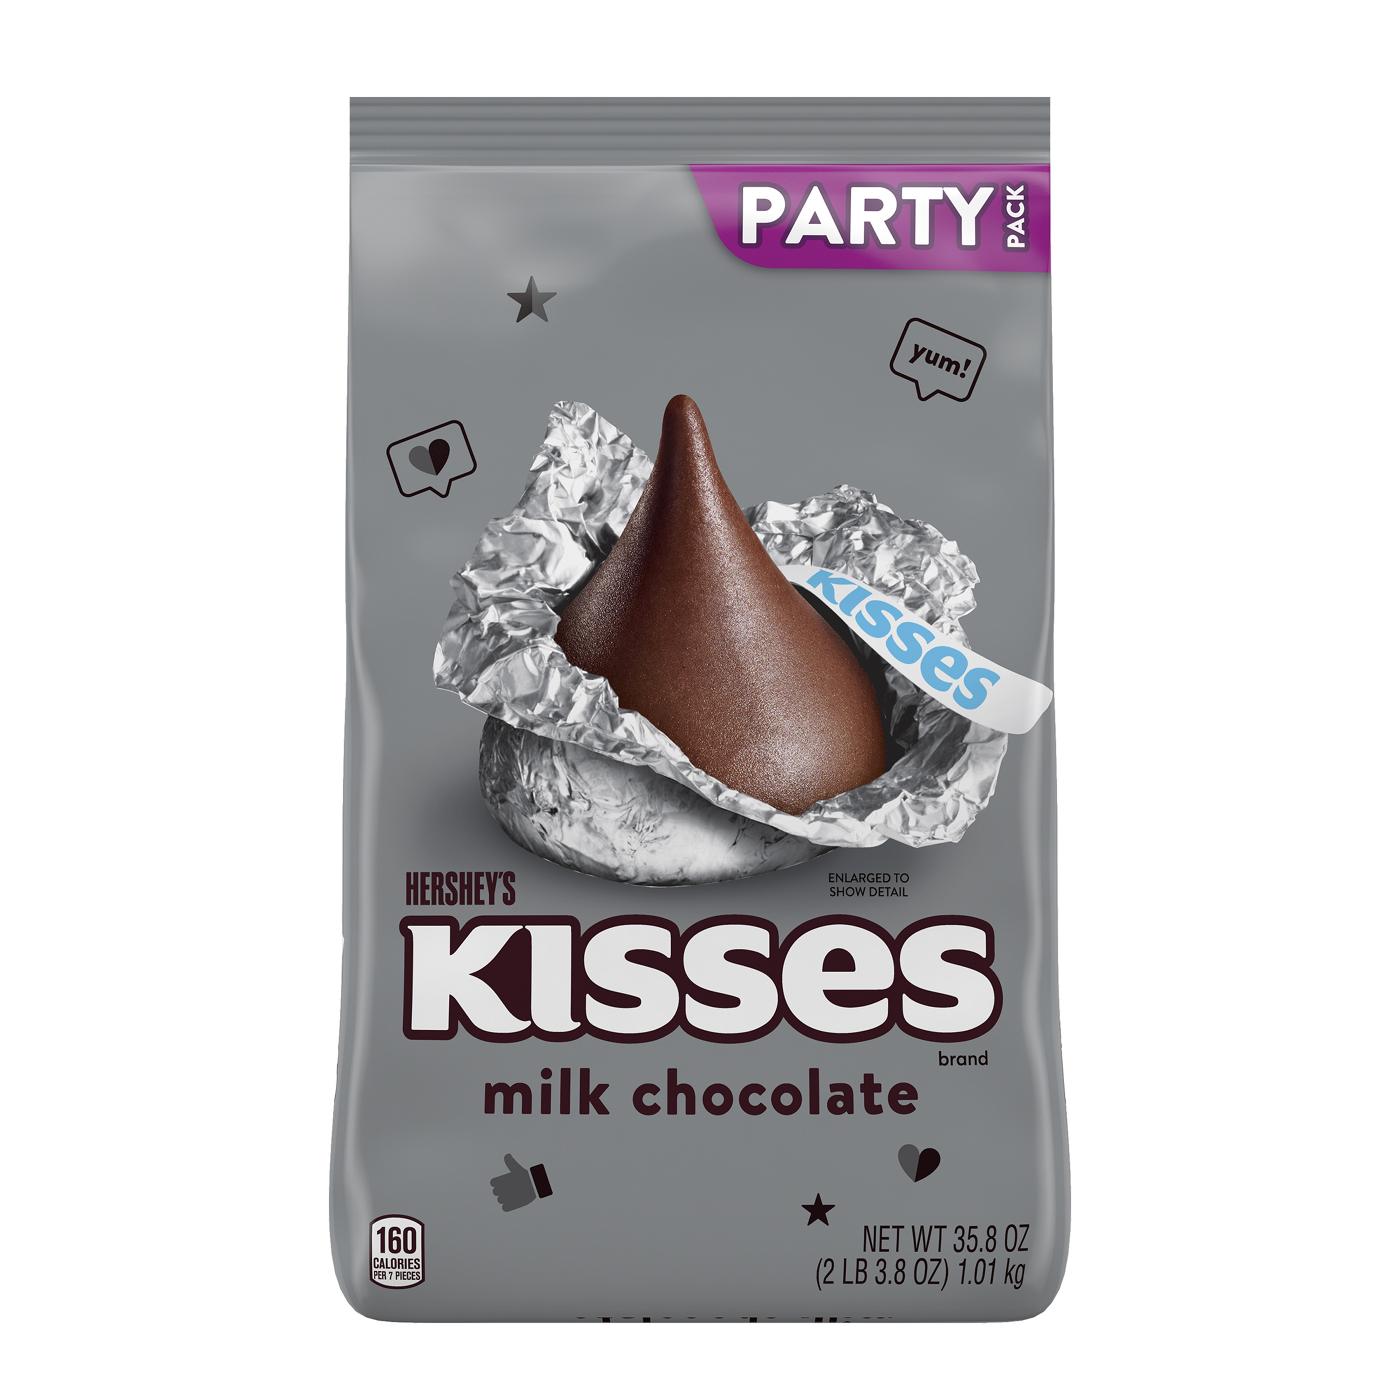 Hershey's Kisses Milk Chocolate Candy - Party Pack; image 1 of 7